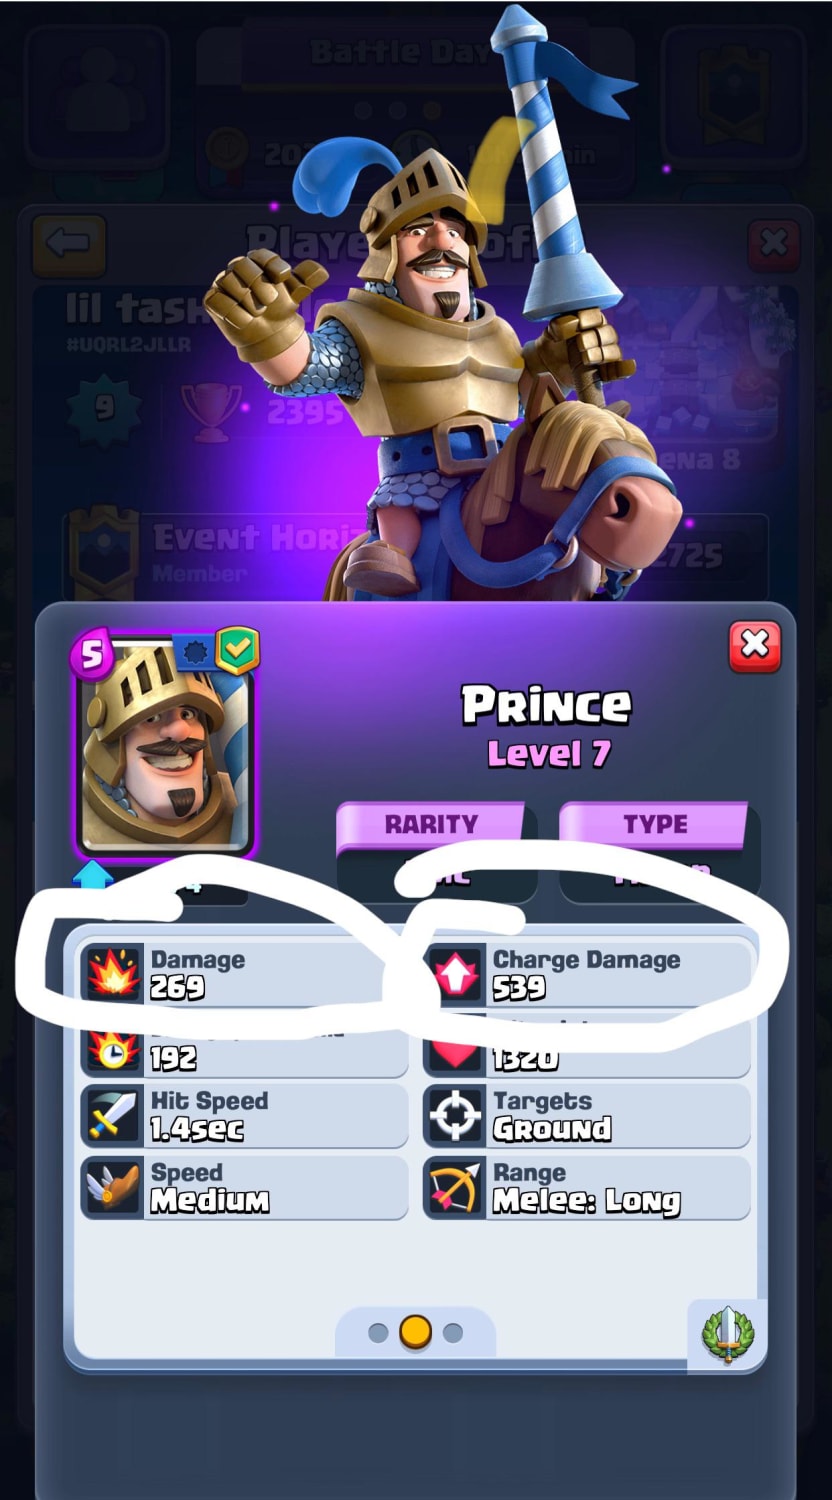 Really Supercell math isn’t that hard 259*2=538 not 539. Literally Unplayable.